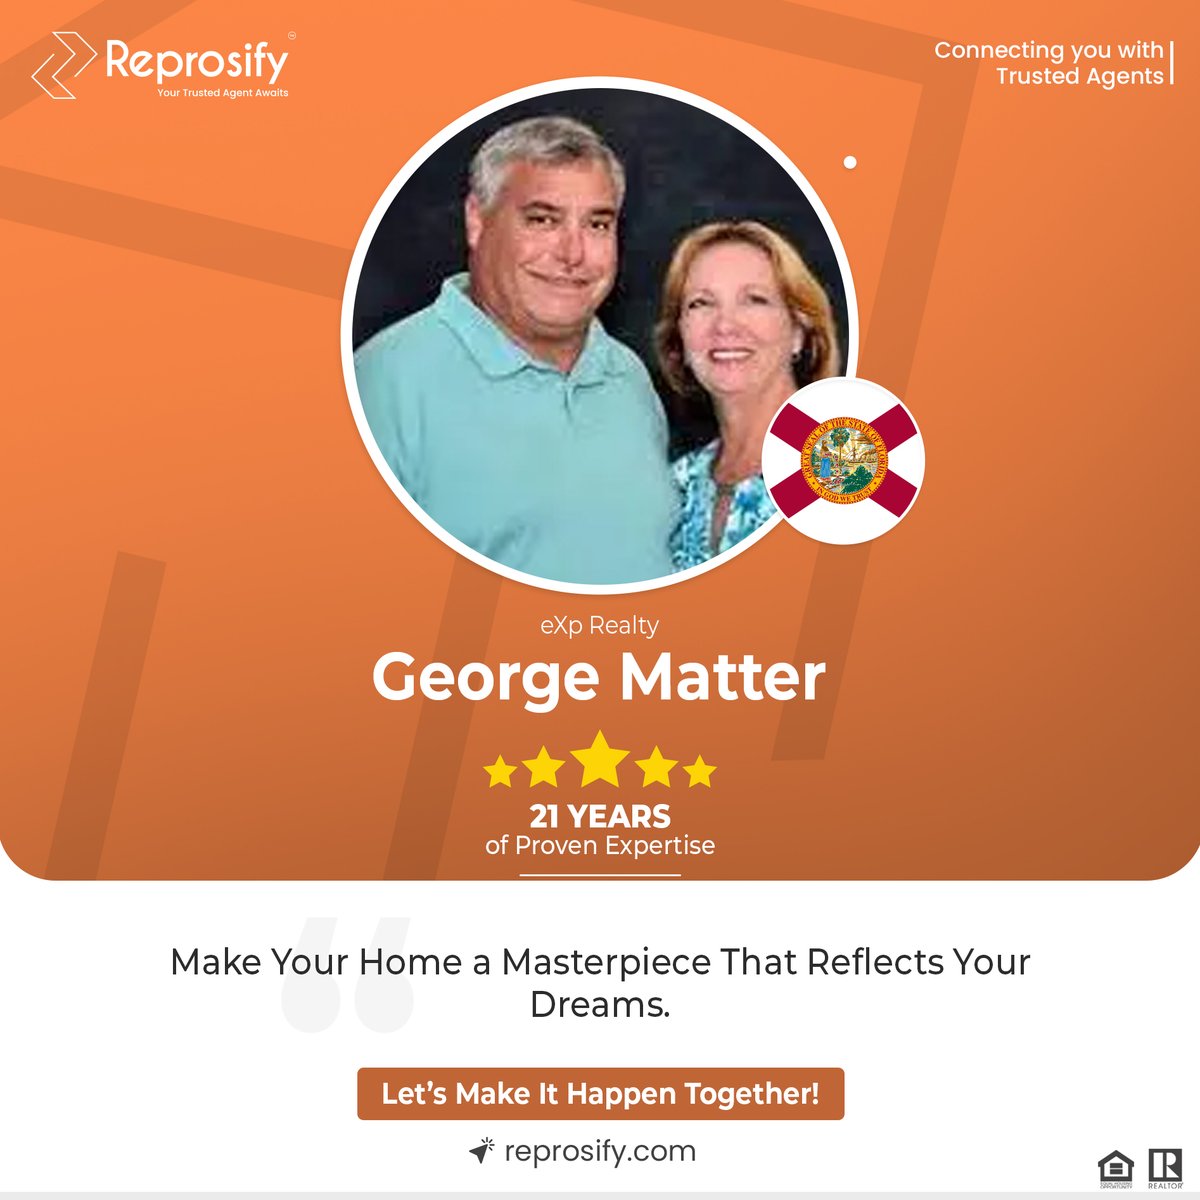 Embrace the extraordinary in Florida with George Matter - connect for a home that's as unique as you!

#Reprosify #AgentsReprosify #eXpRealty #Georgematter #realestate #realtor #Broker #realtorlife #realestatemarketing #realestateleads #Floridarealestate #Stuartrealestate